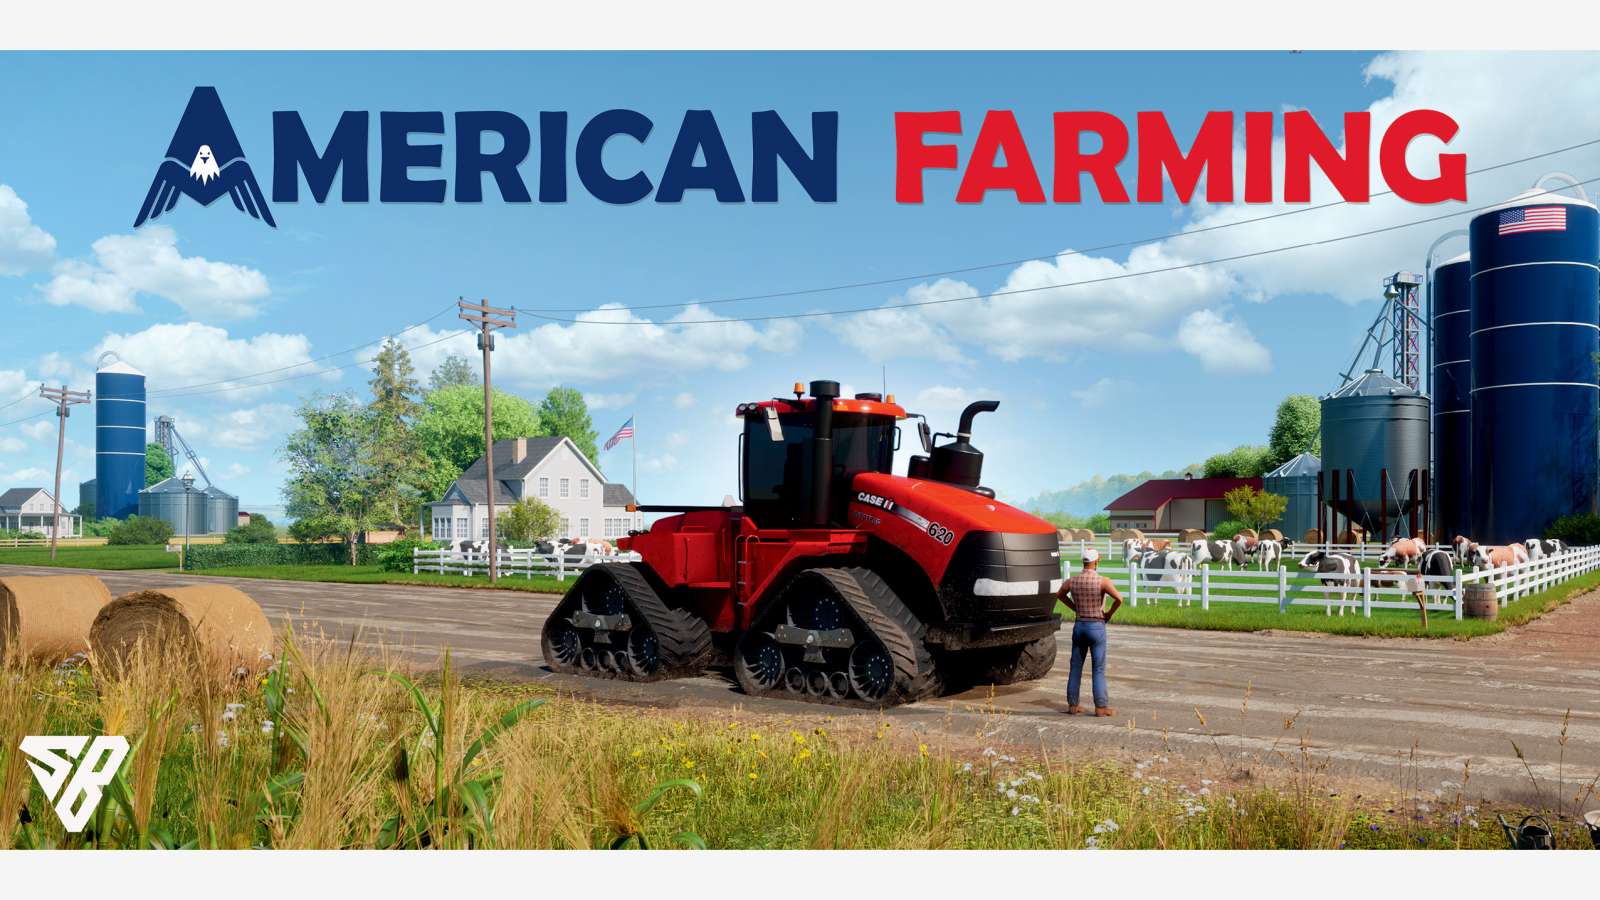 Grant recently launched American Farming, pictured above, a game that allows people to create a personalized farming character, virtually plant and harvest crops, raise livestock, and buy equipment.